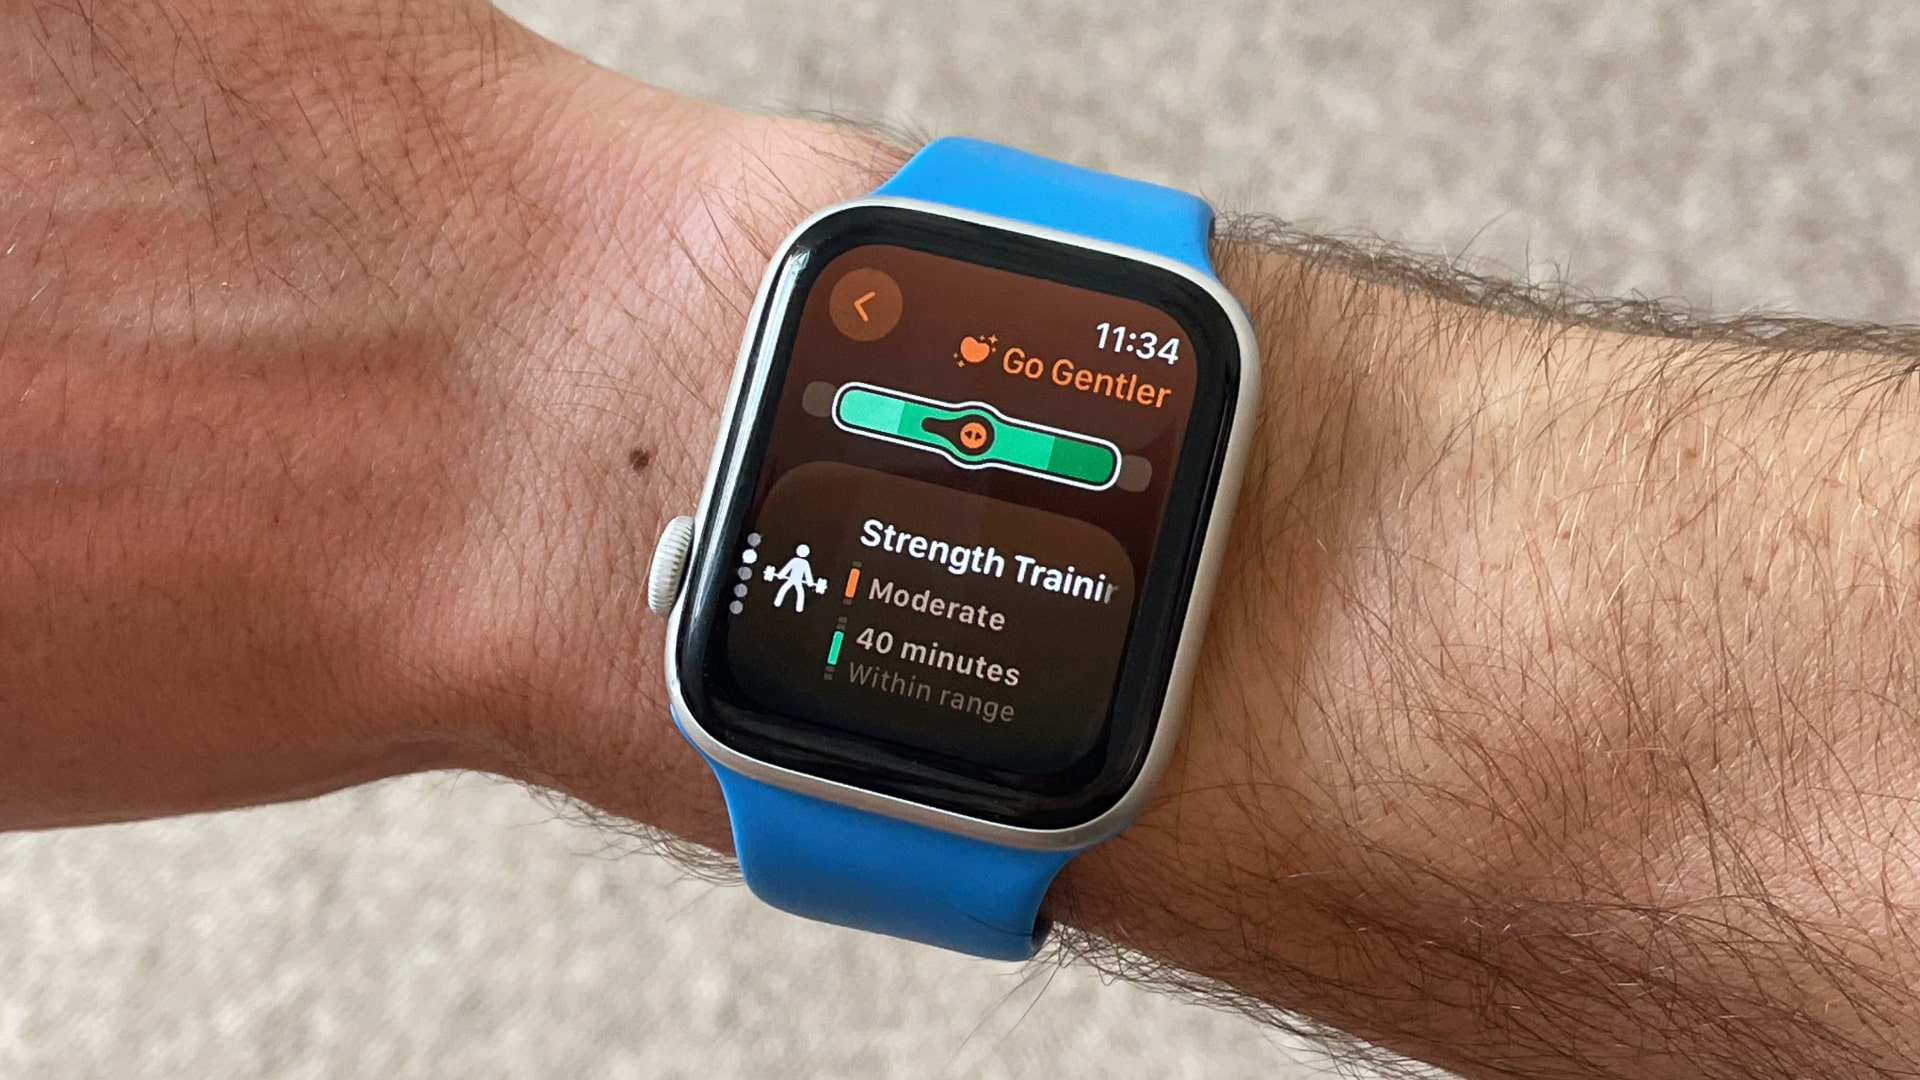 A person wearing an Apple Watch with the Gentler Streak app showing on the Watch face.